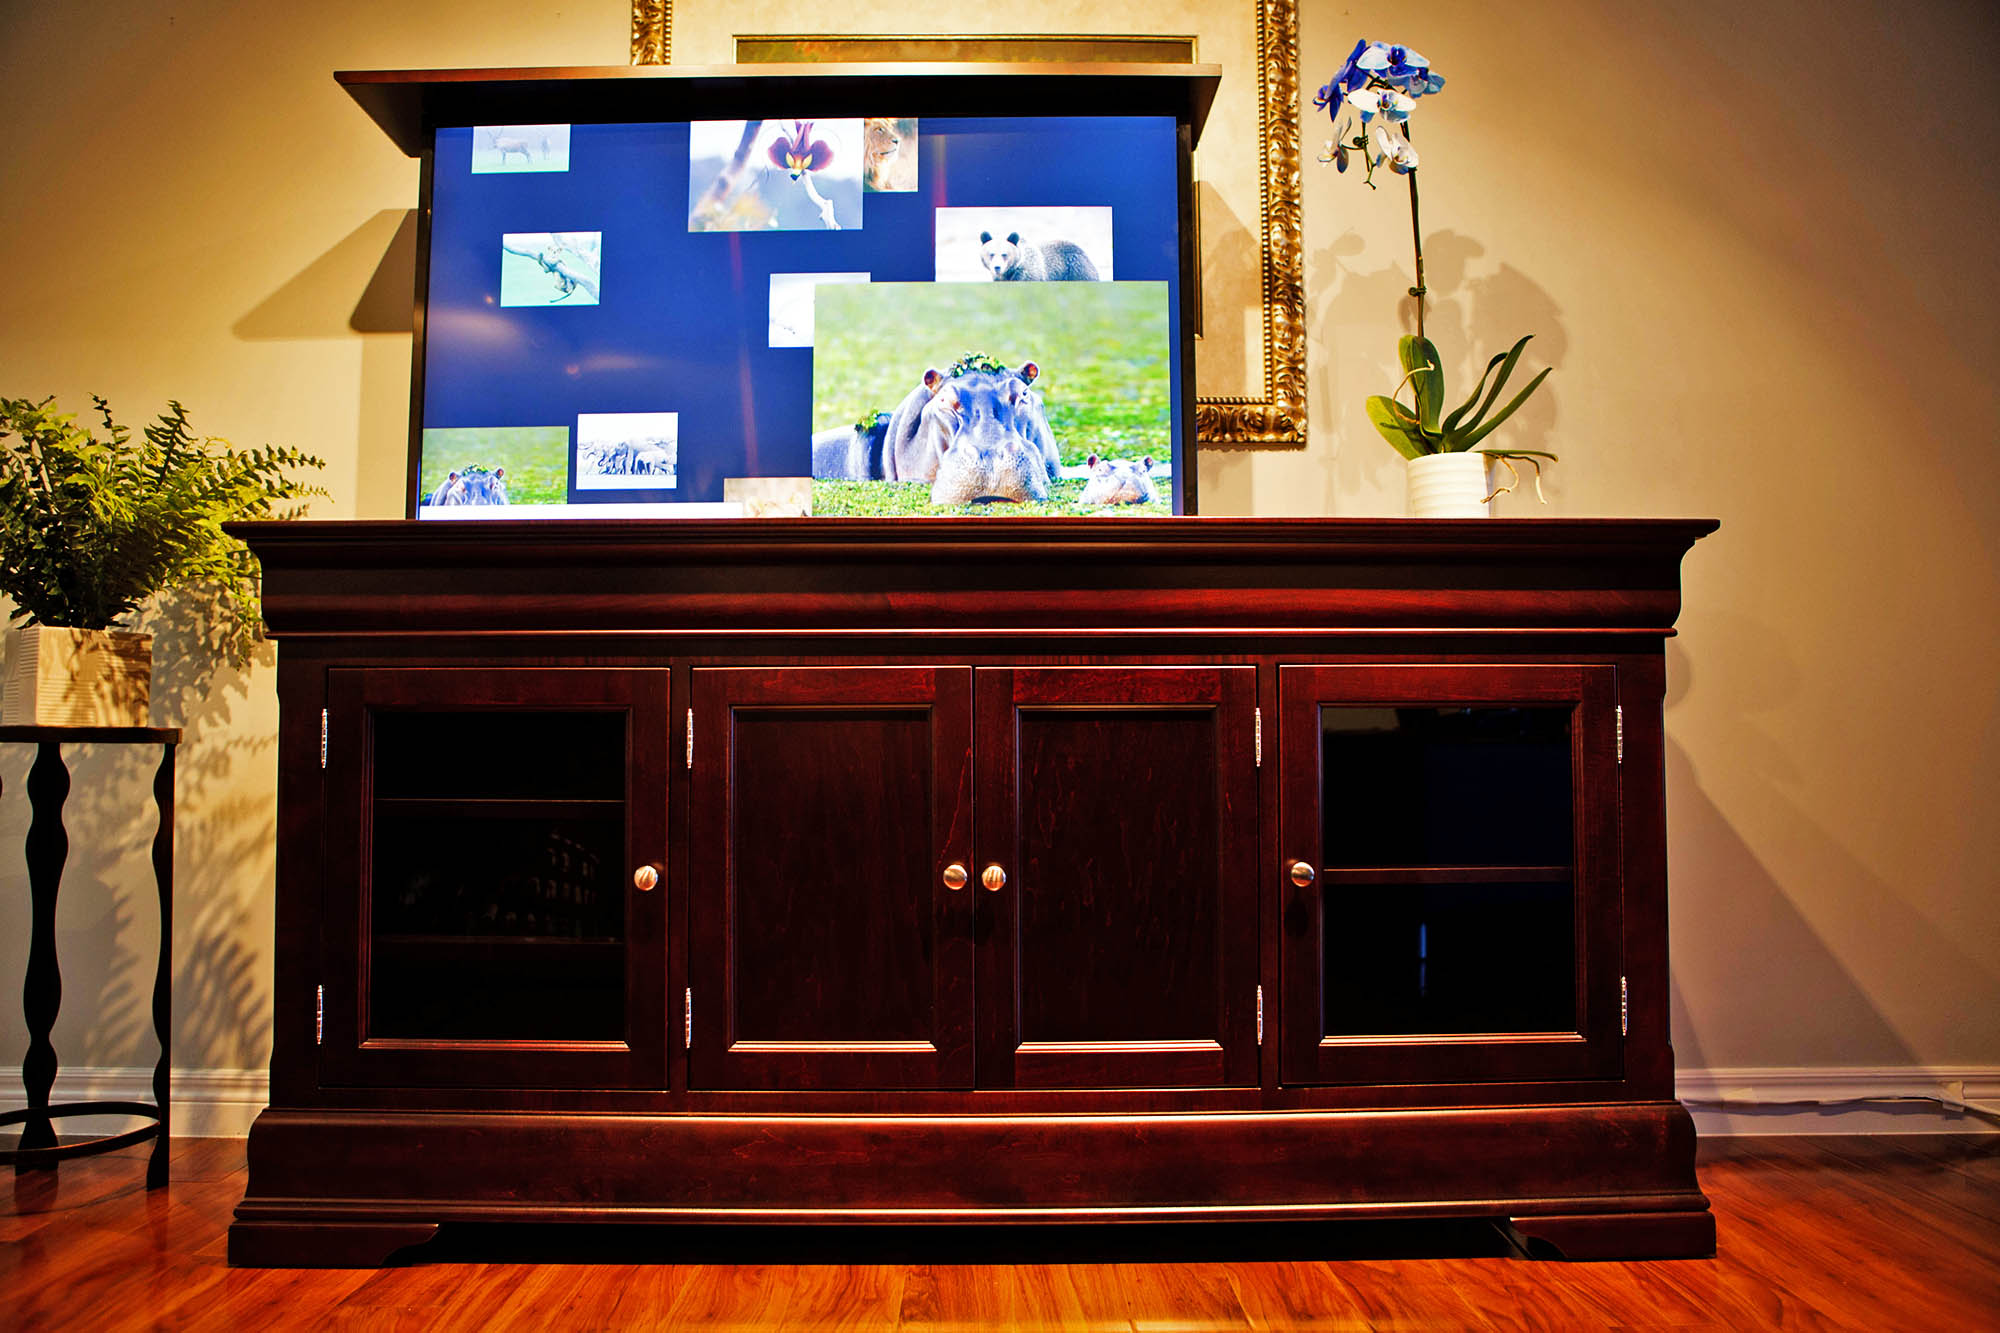 The Tuscany Tv Lift Cabinet Activated Decor